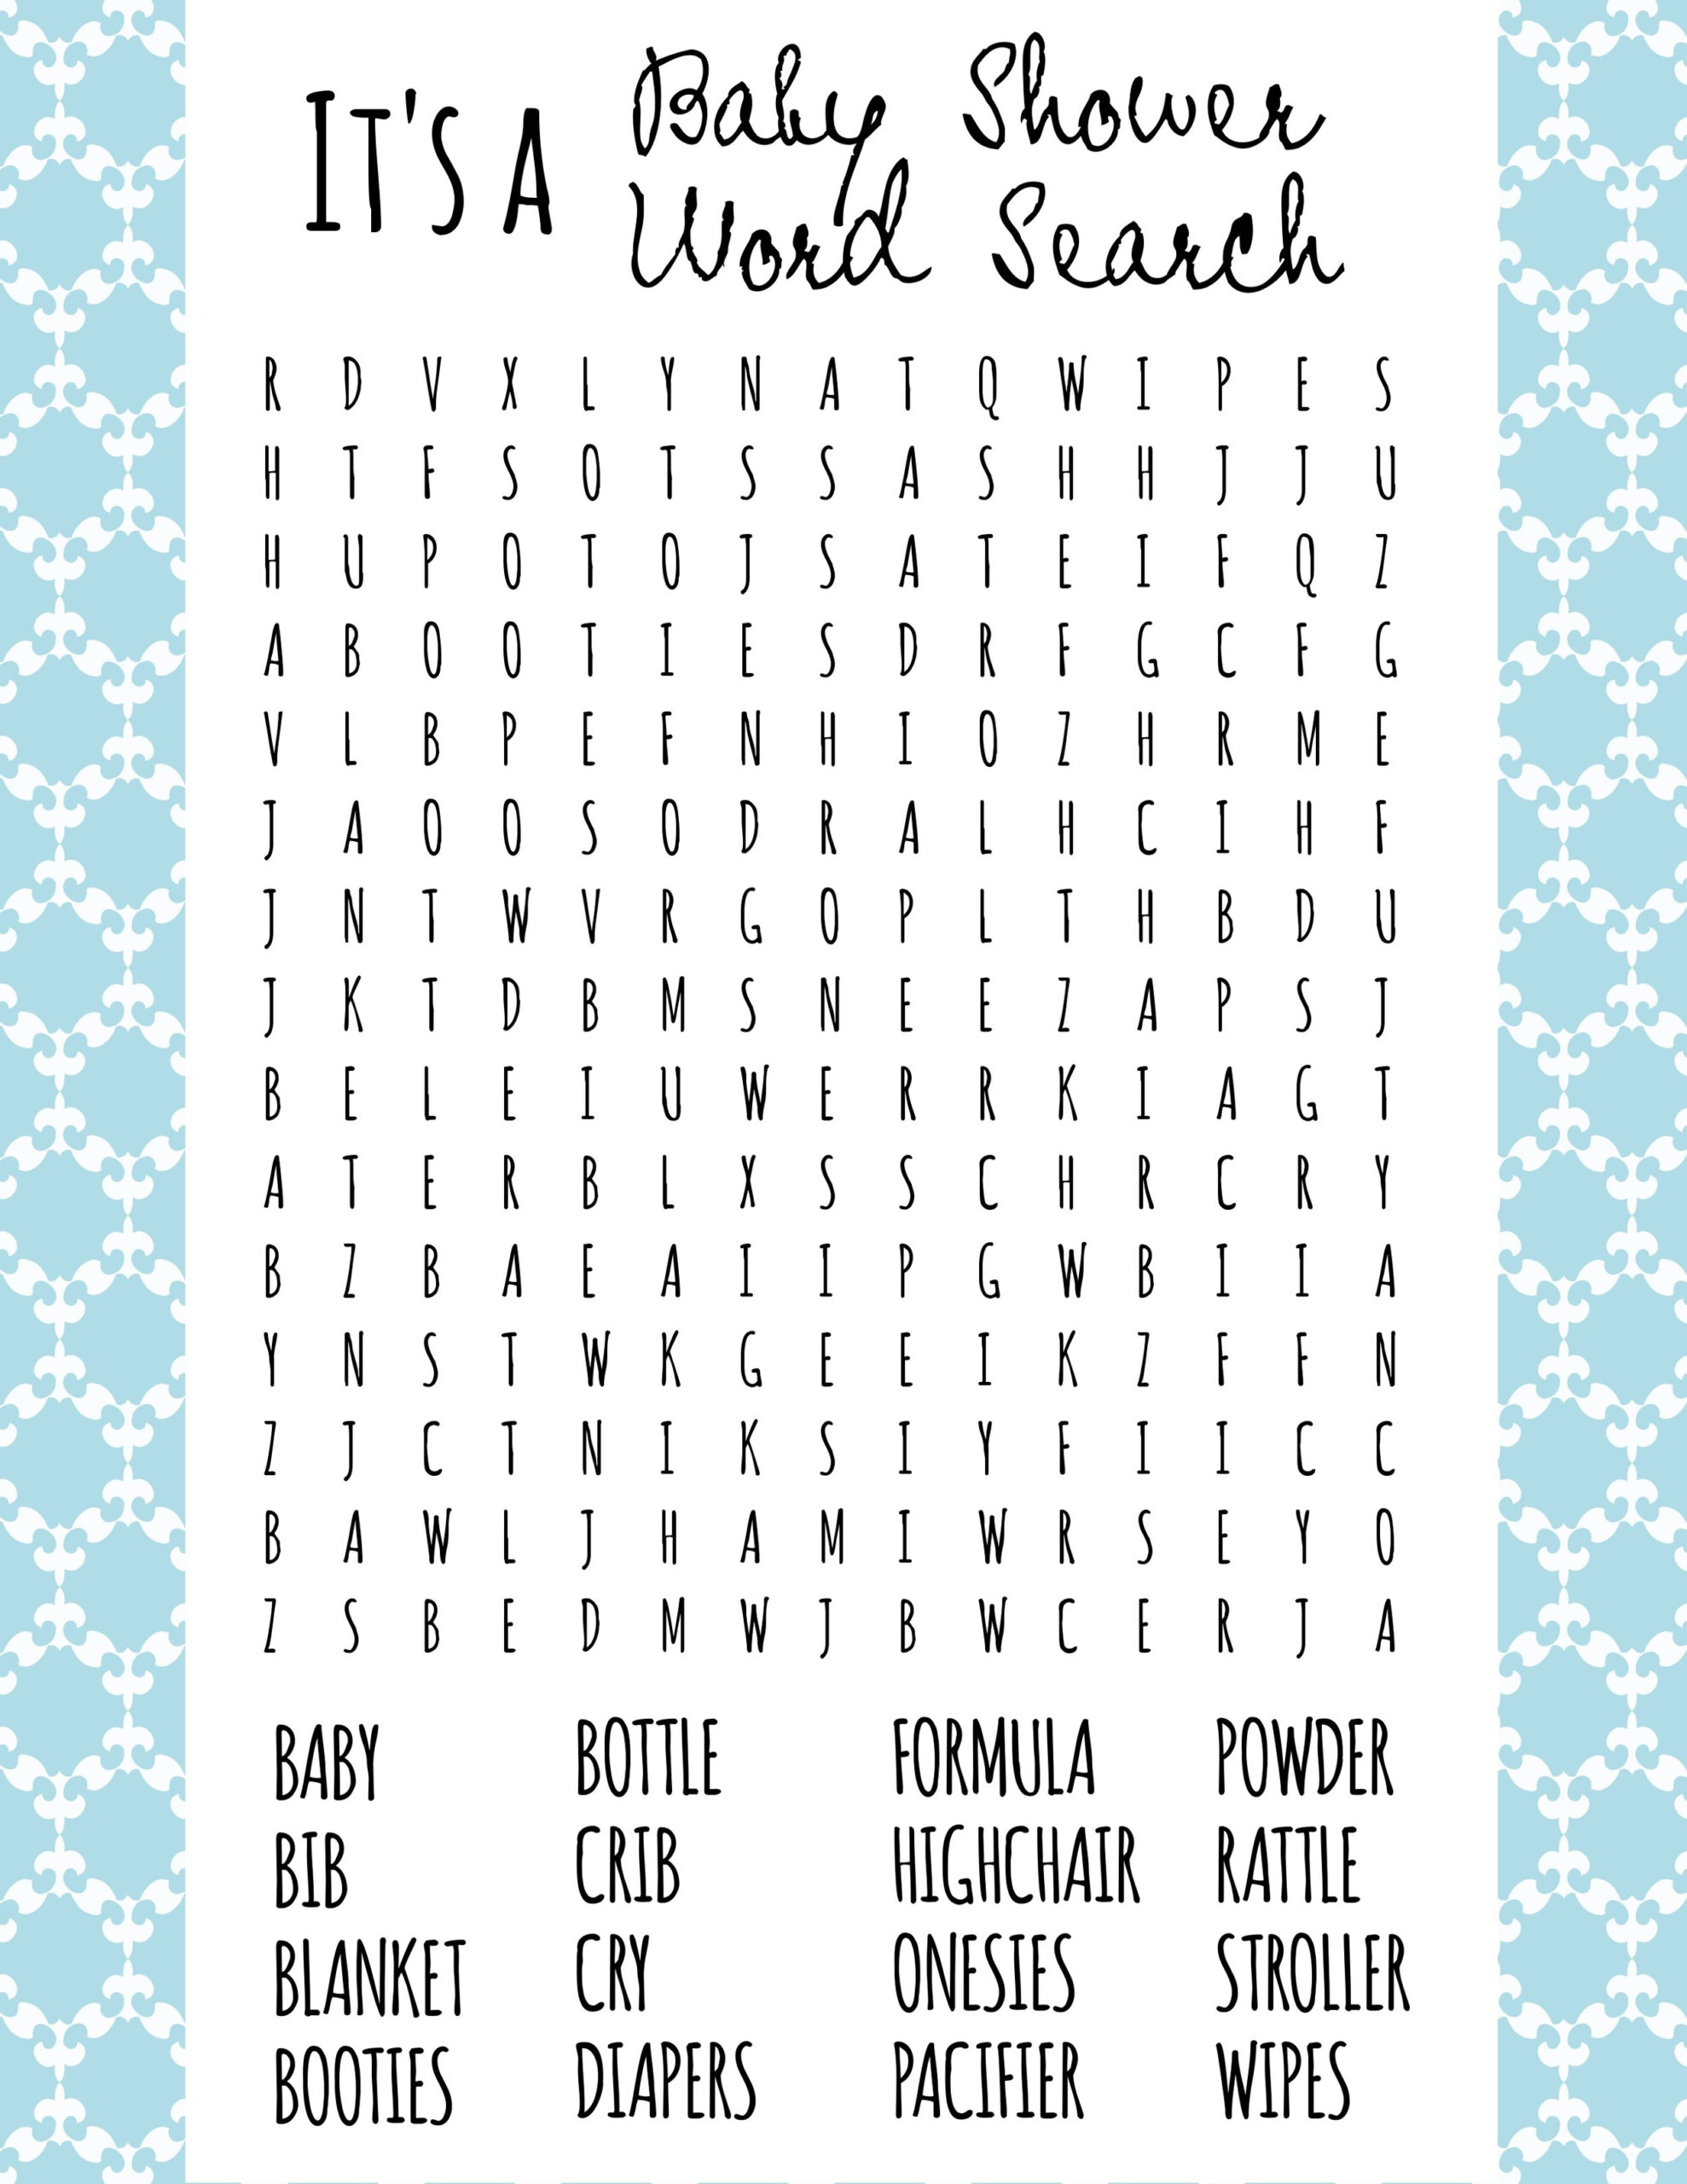 Free Printable Baby Shower Games - Download Instantly! pertaining to Free Printable Baby Shower Games With Answers